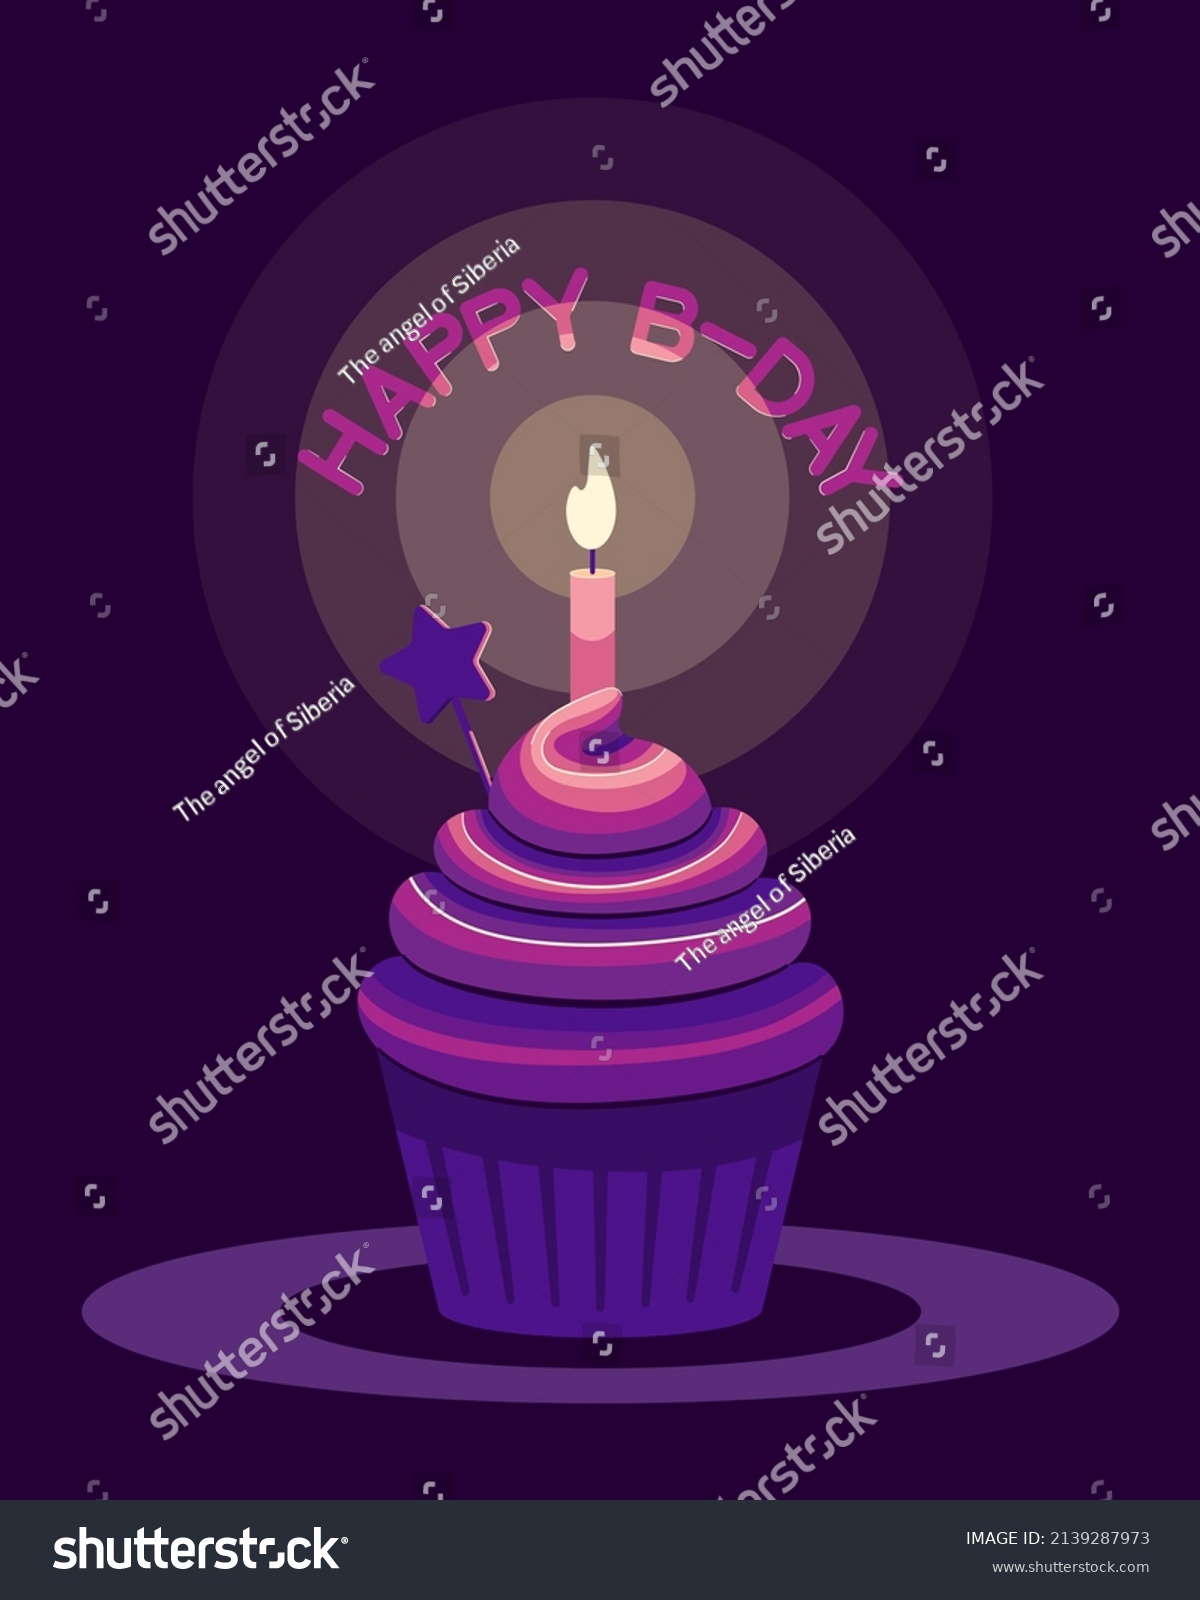 Cute Happy Birthday Card Cake Candle Stock Vector Royalty Free 2139287973 Shutterstock